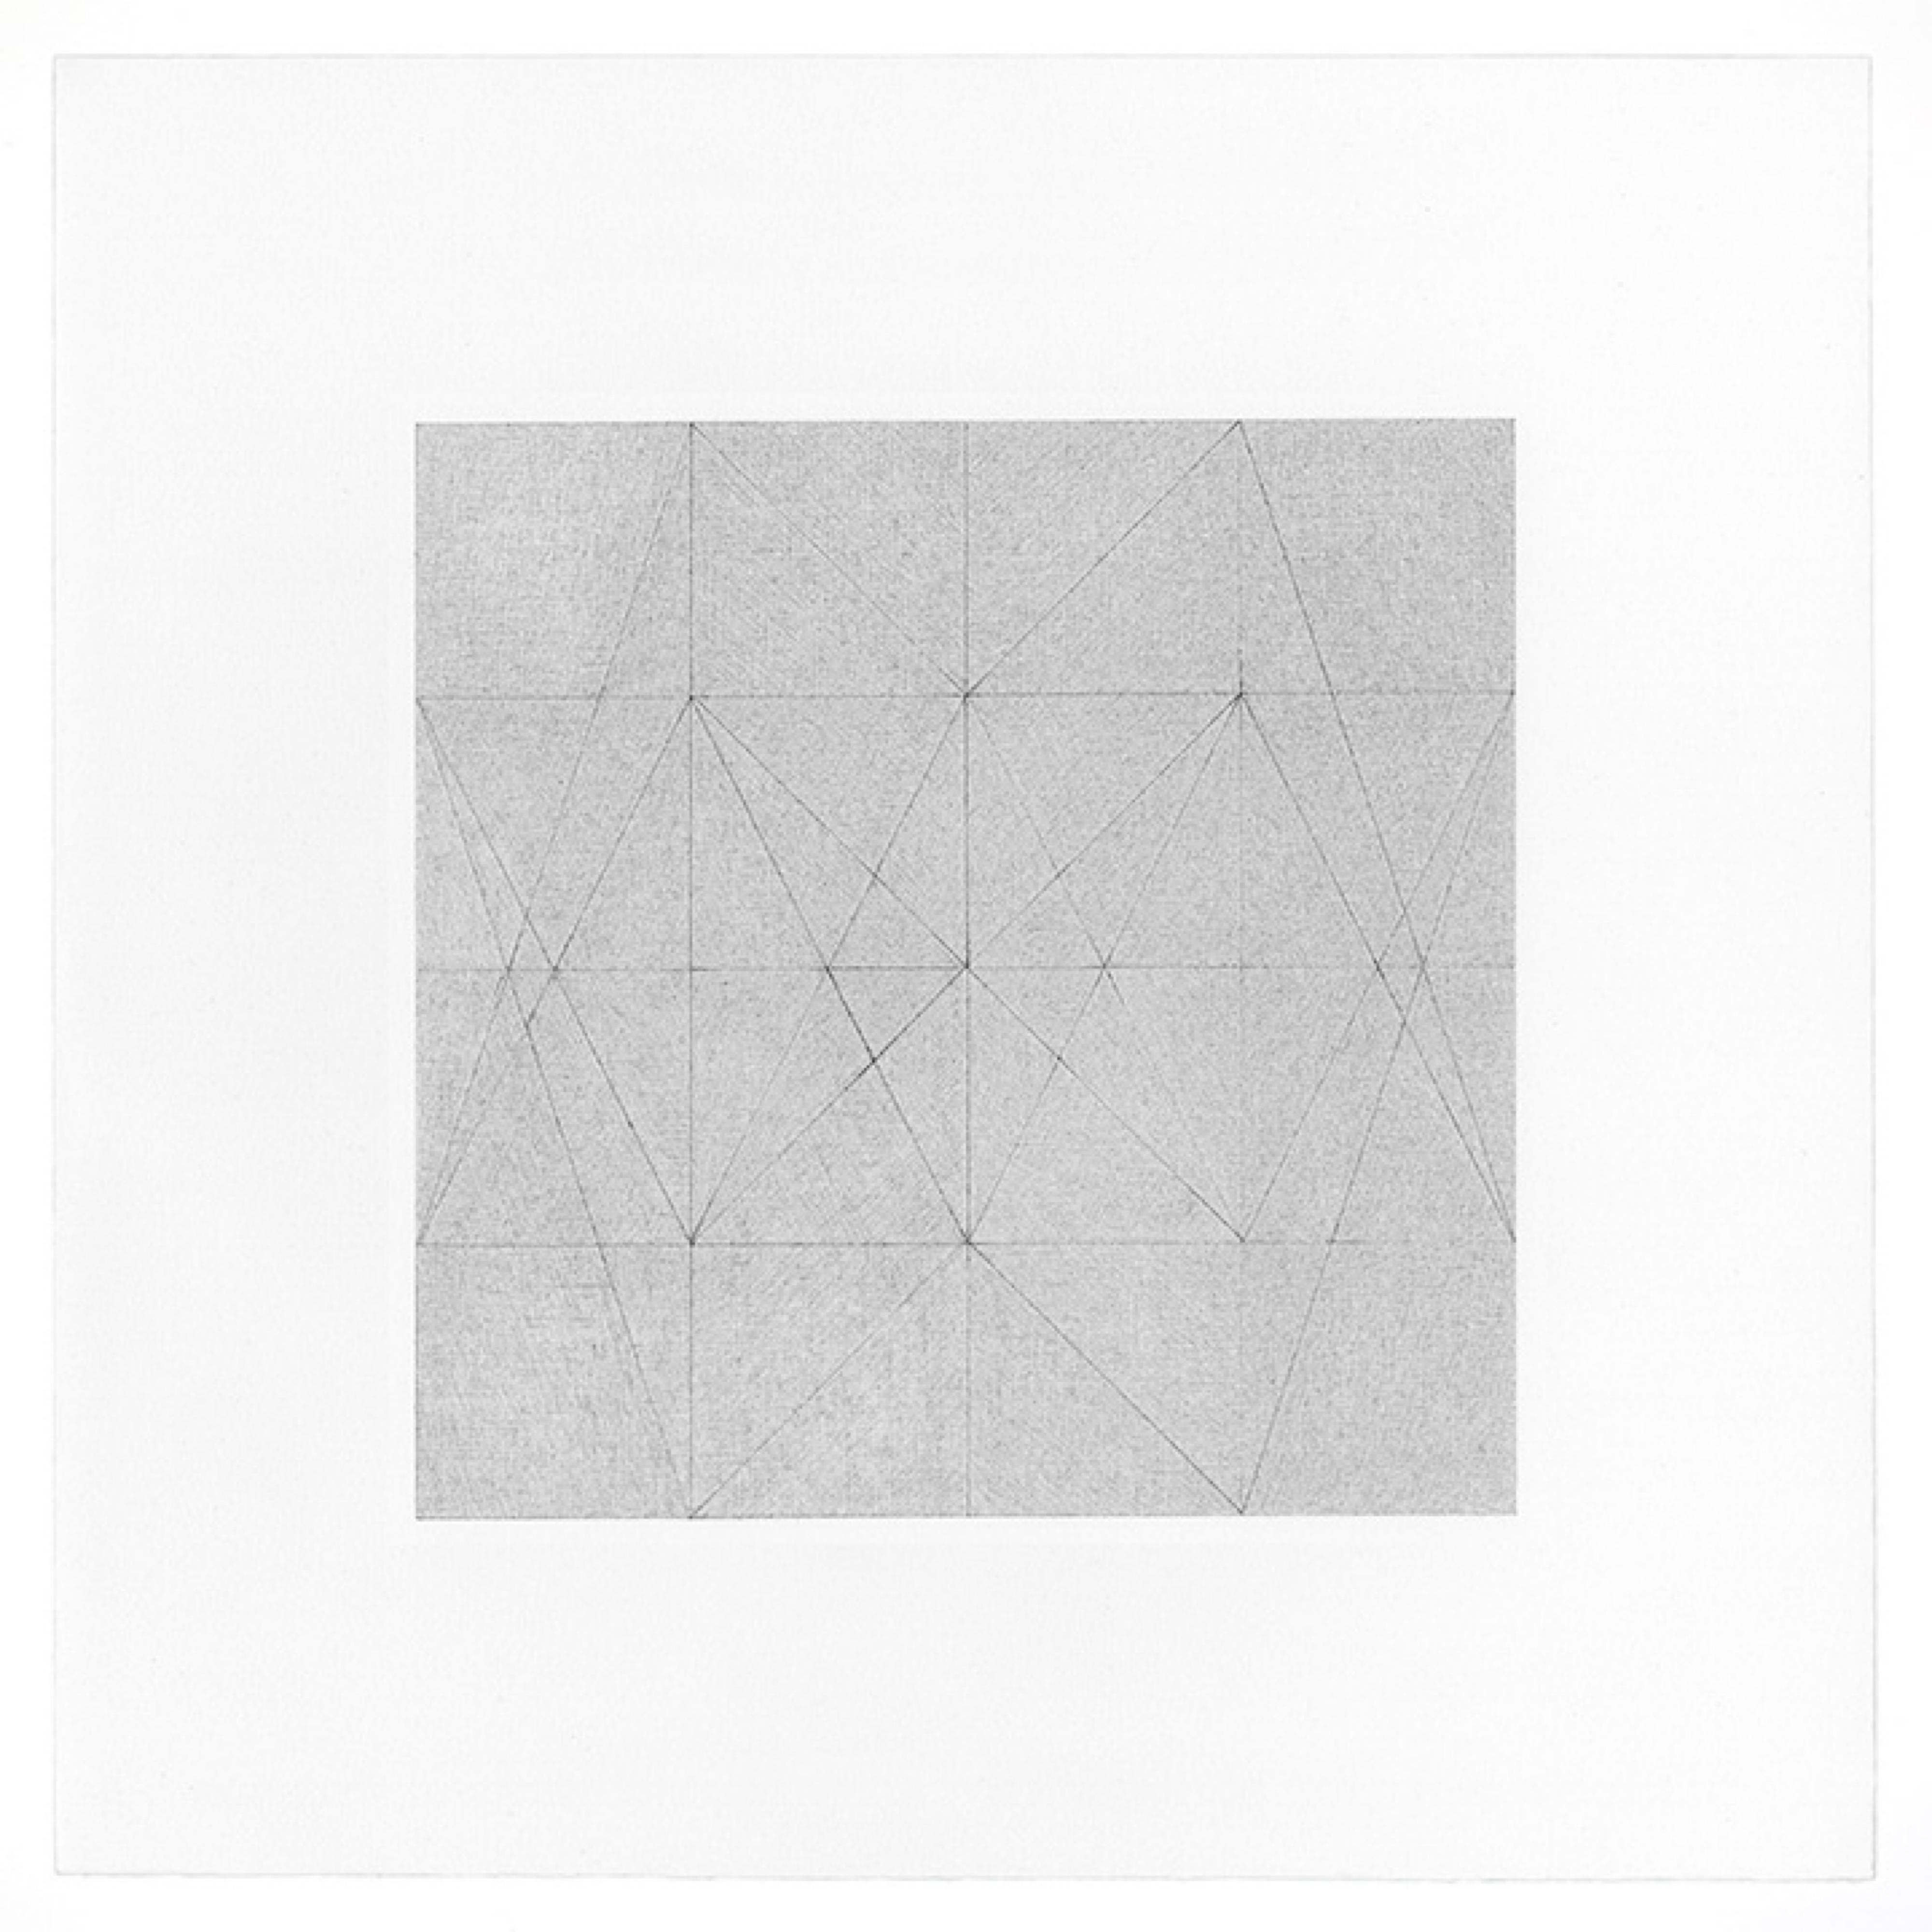 Contemporary Patrick Carrara Graphite on Magni Drawings, Garden of Silence Series, 2009 For Sale